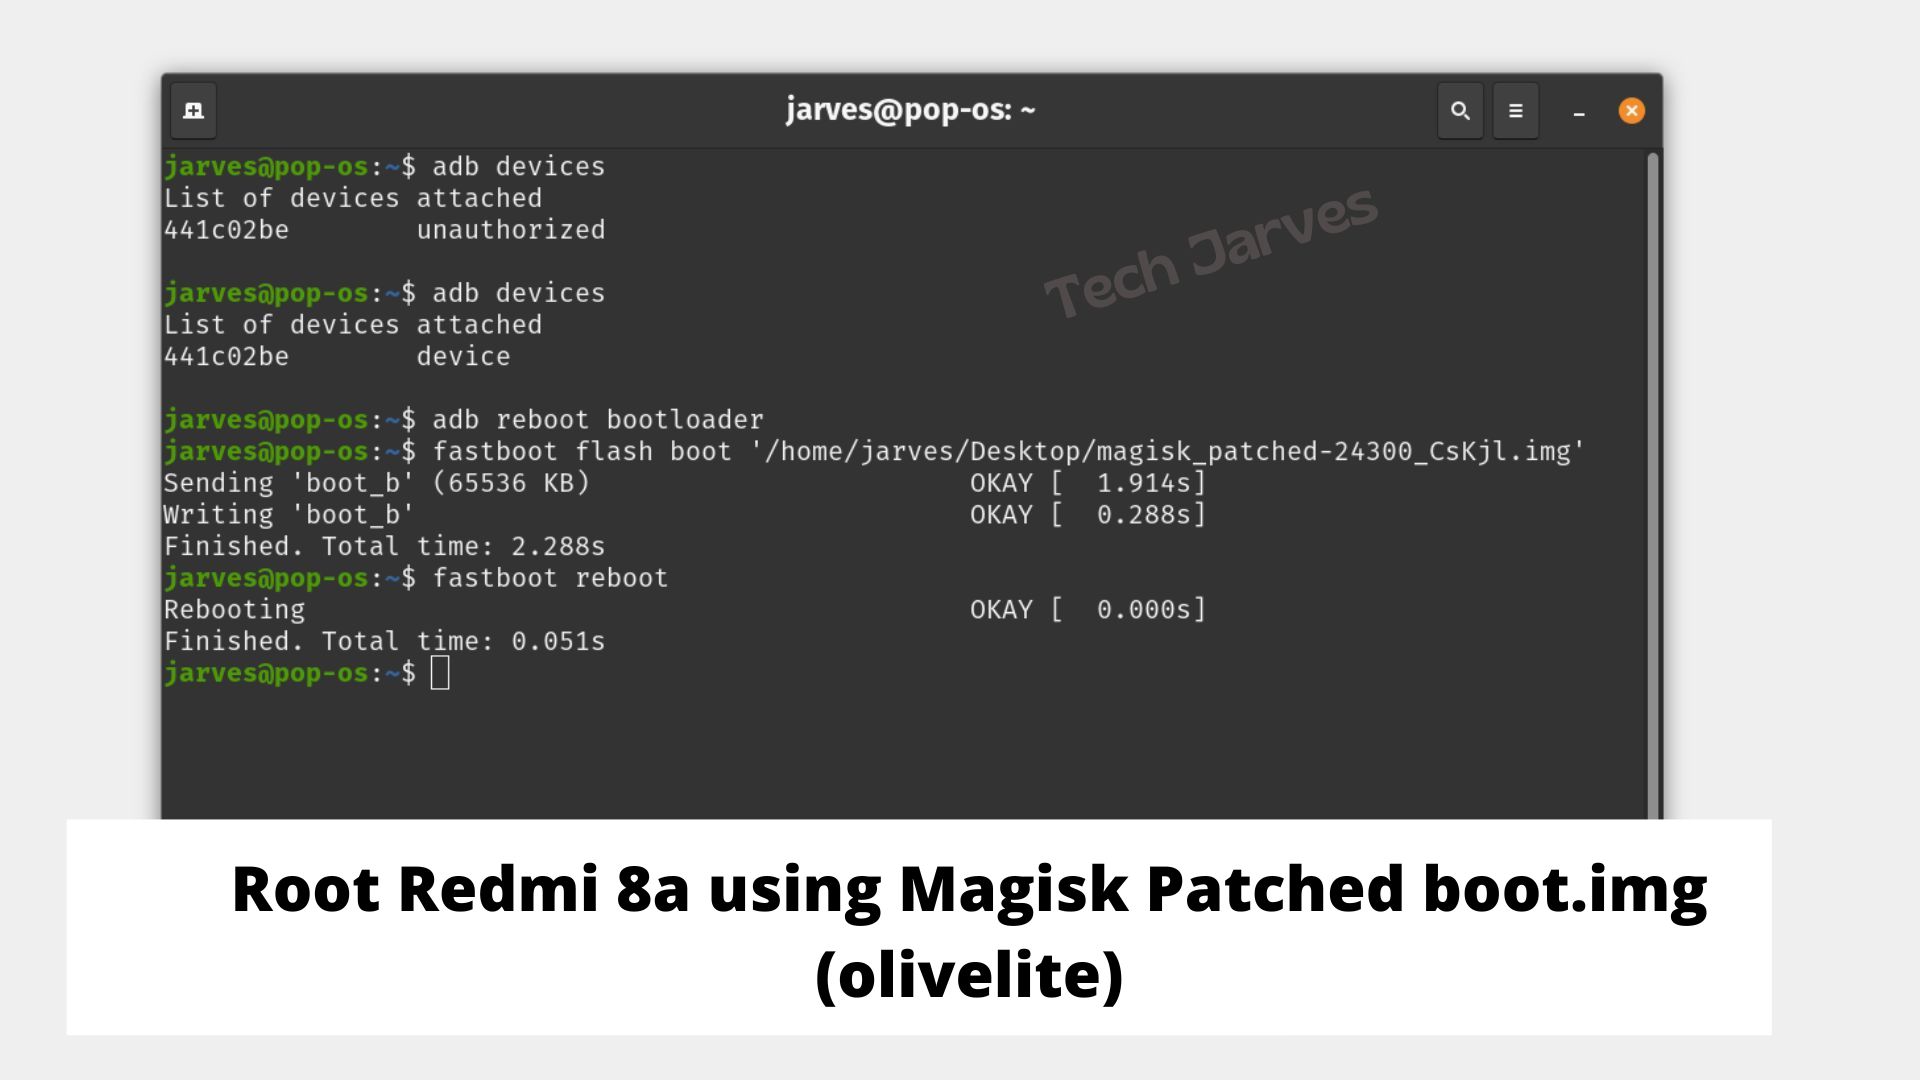 Root Redmi 8a using Magisk Patched boot.img